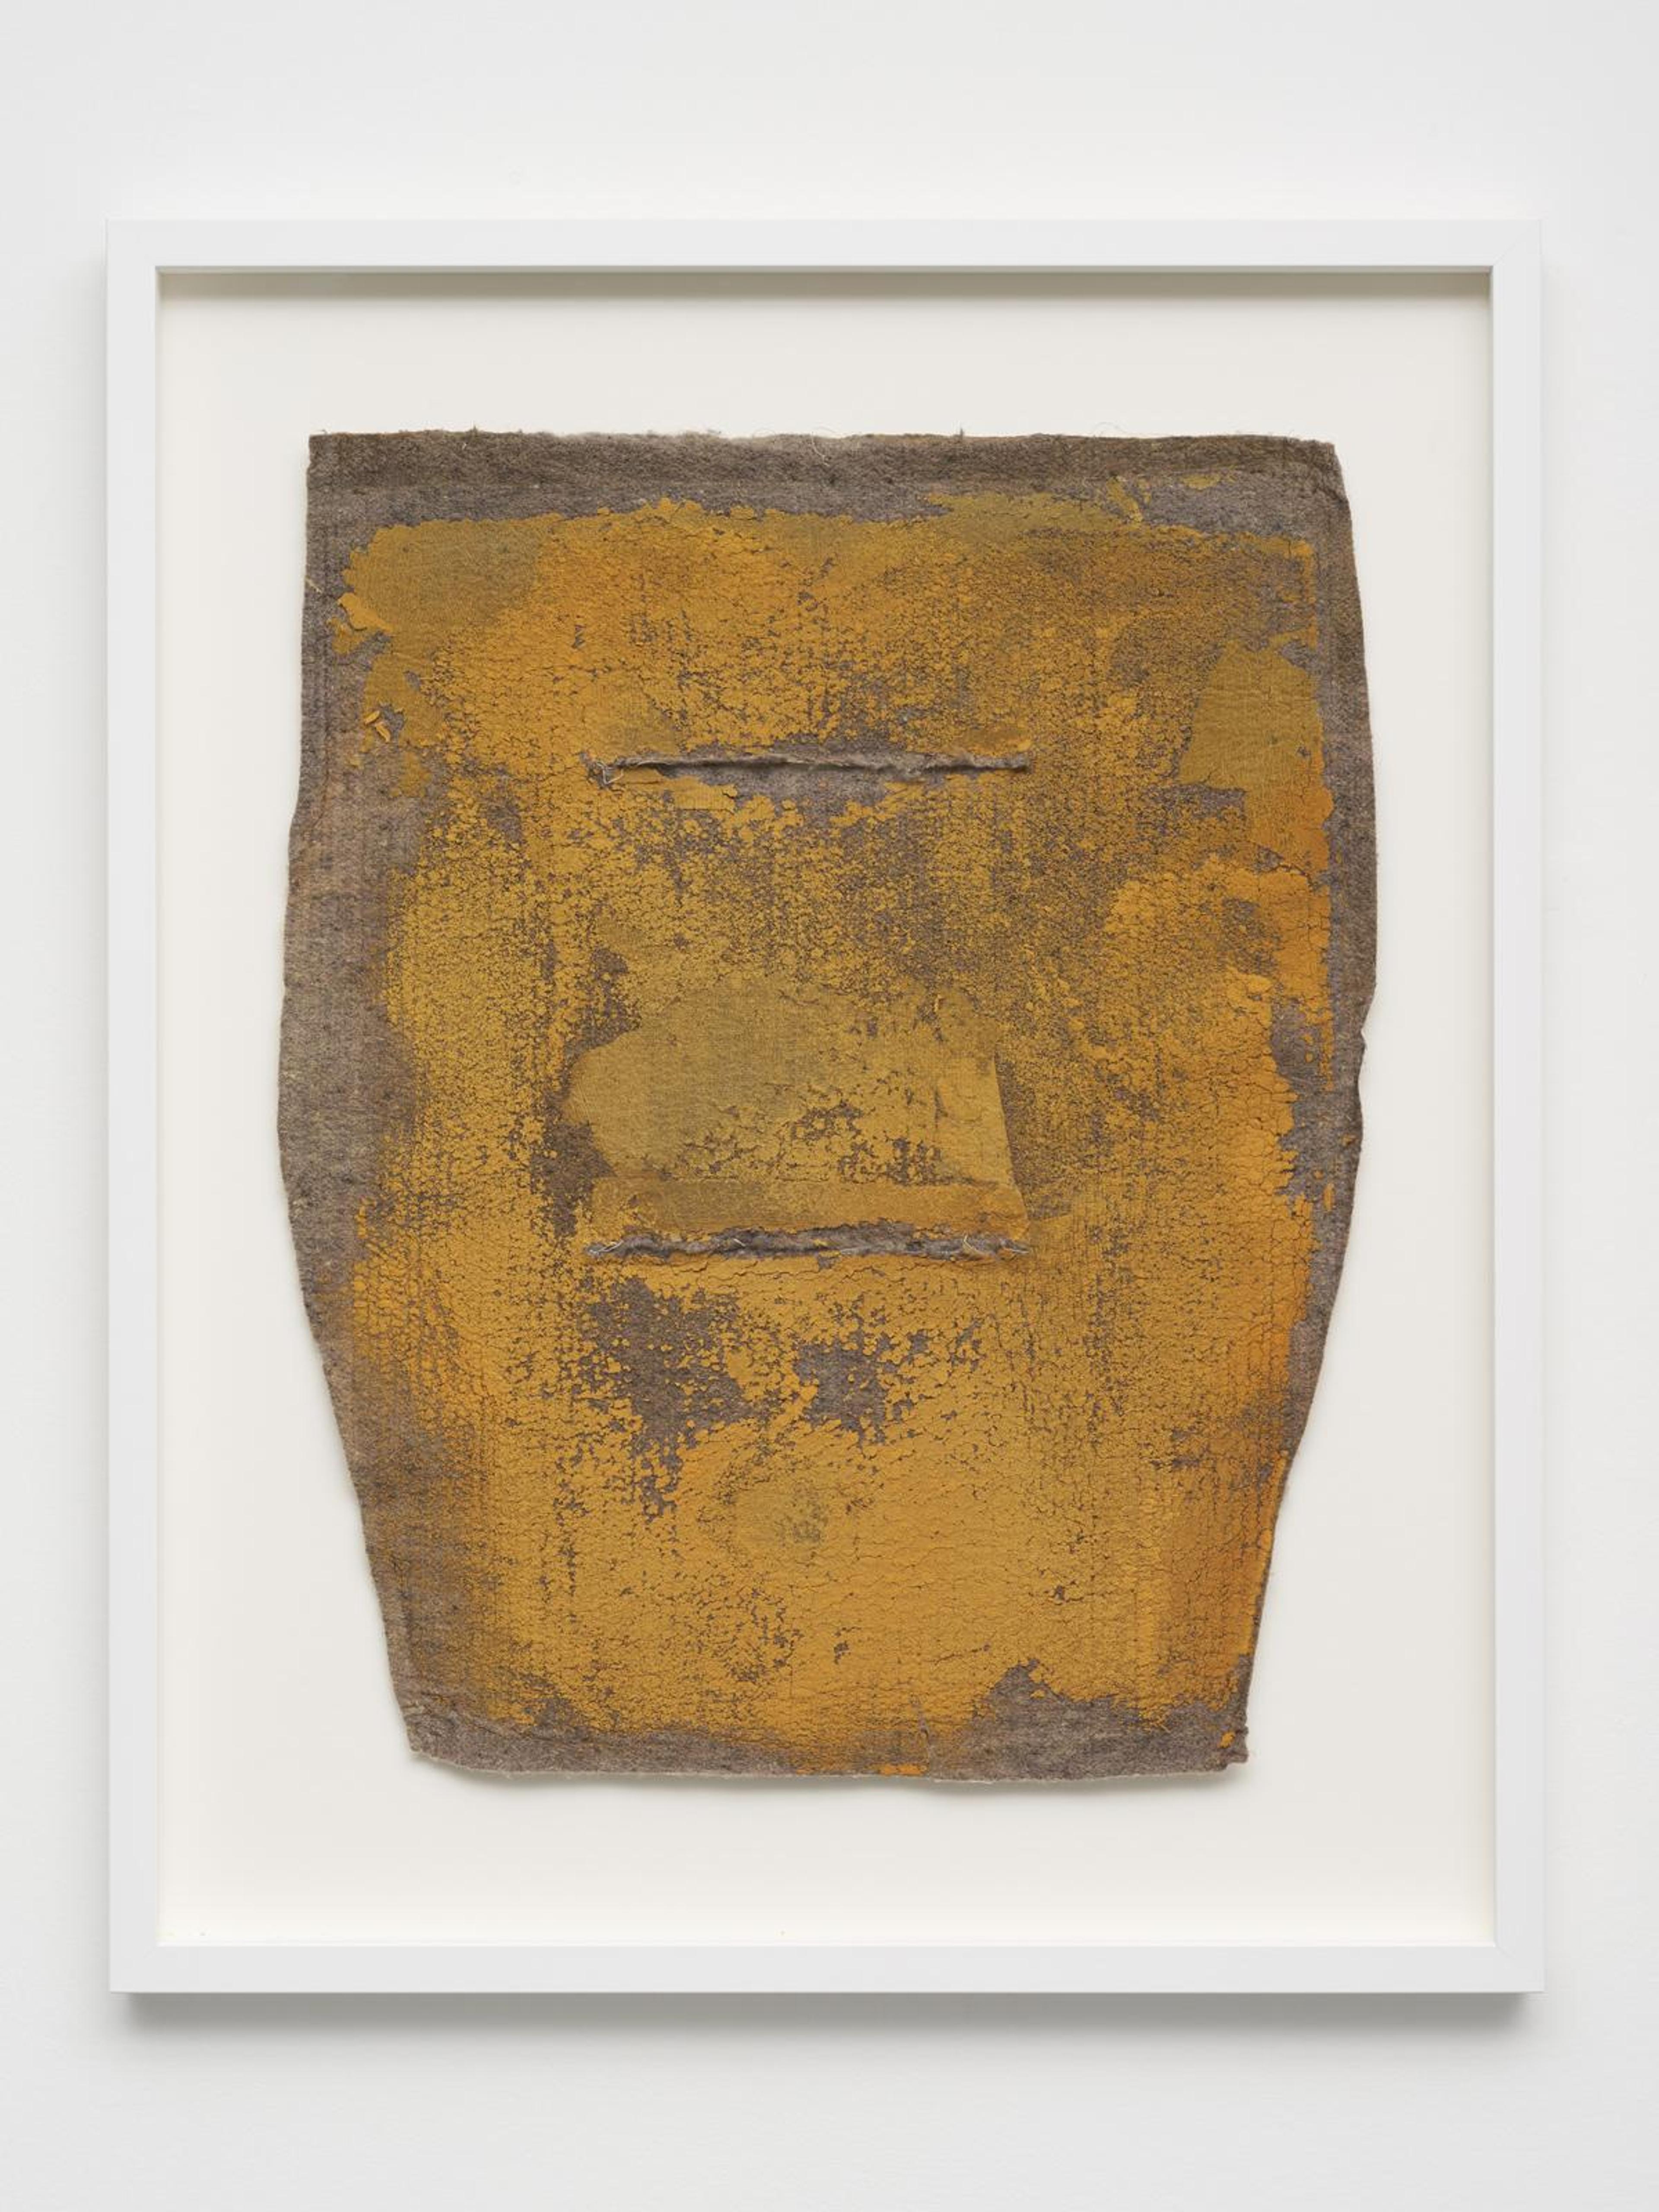 Rhea Dillon, Faeces I , 2021, polyester backing and foam, 45 &times; 55 cm (59 &times; 73 cm framed). Courtesy: the artist and Soft Opening, London. Photo: Theo Christelis